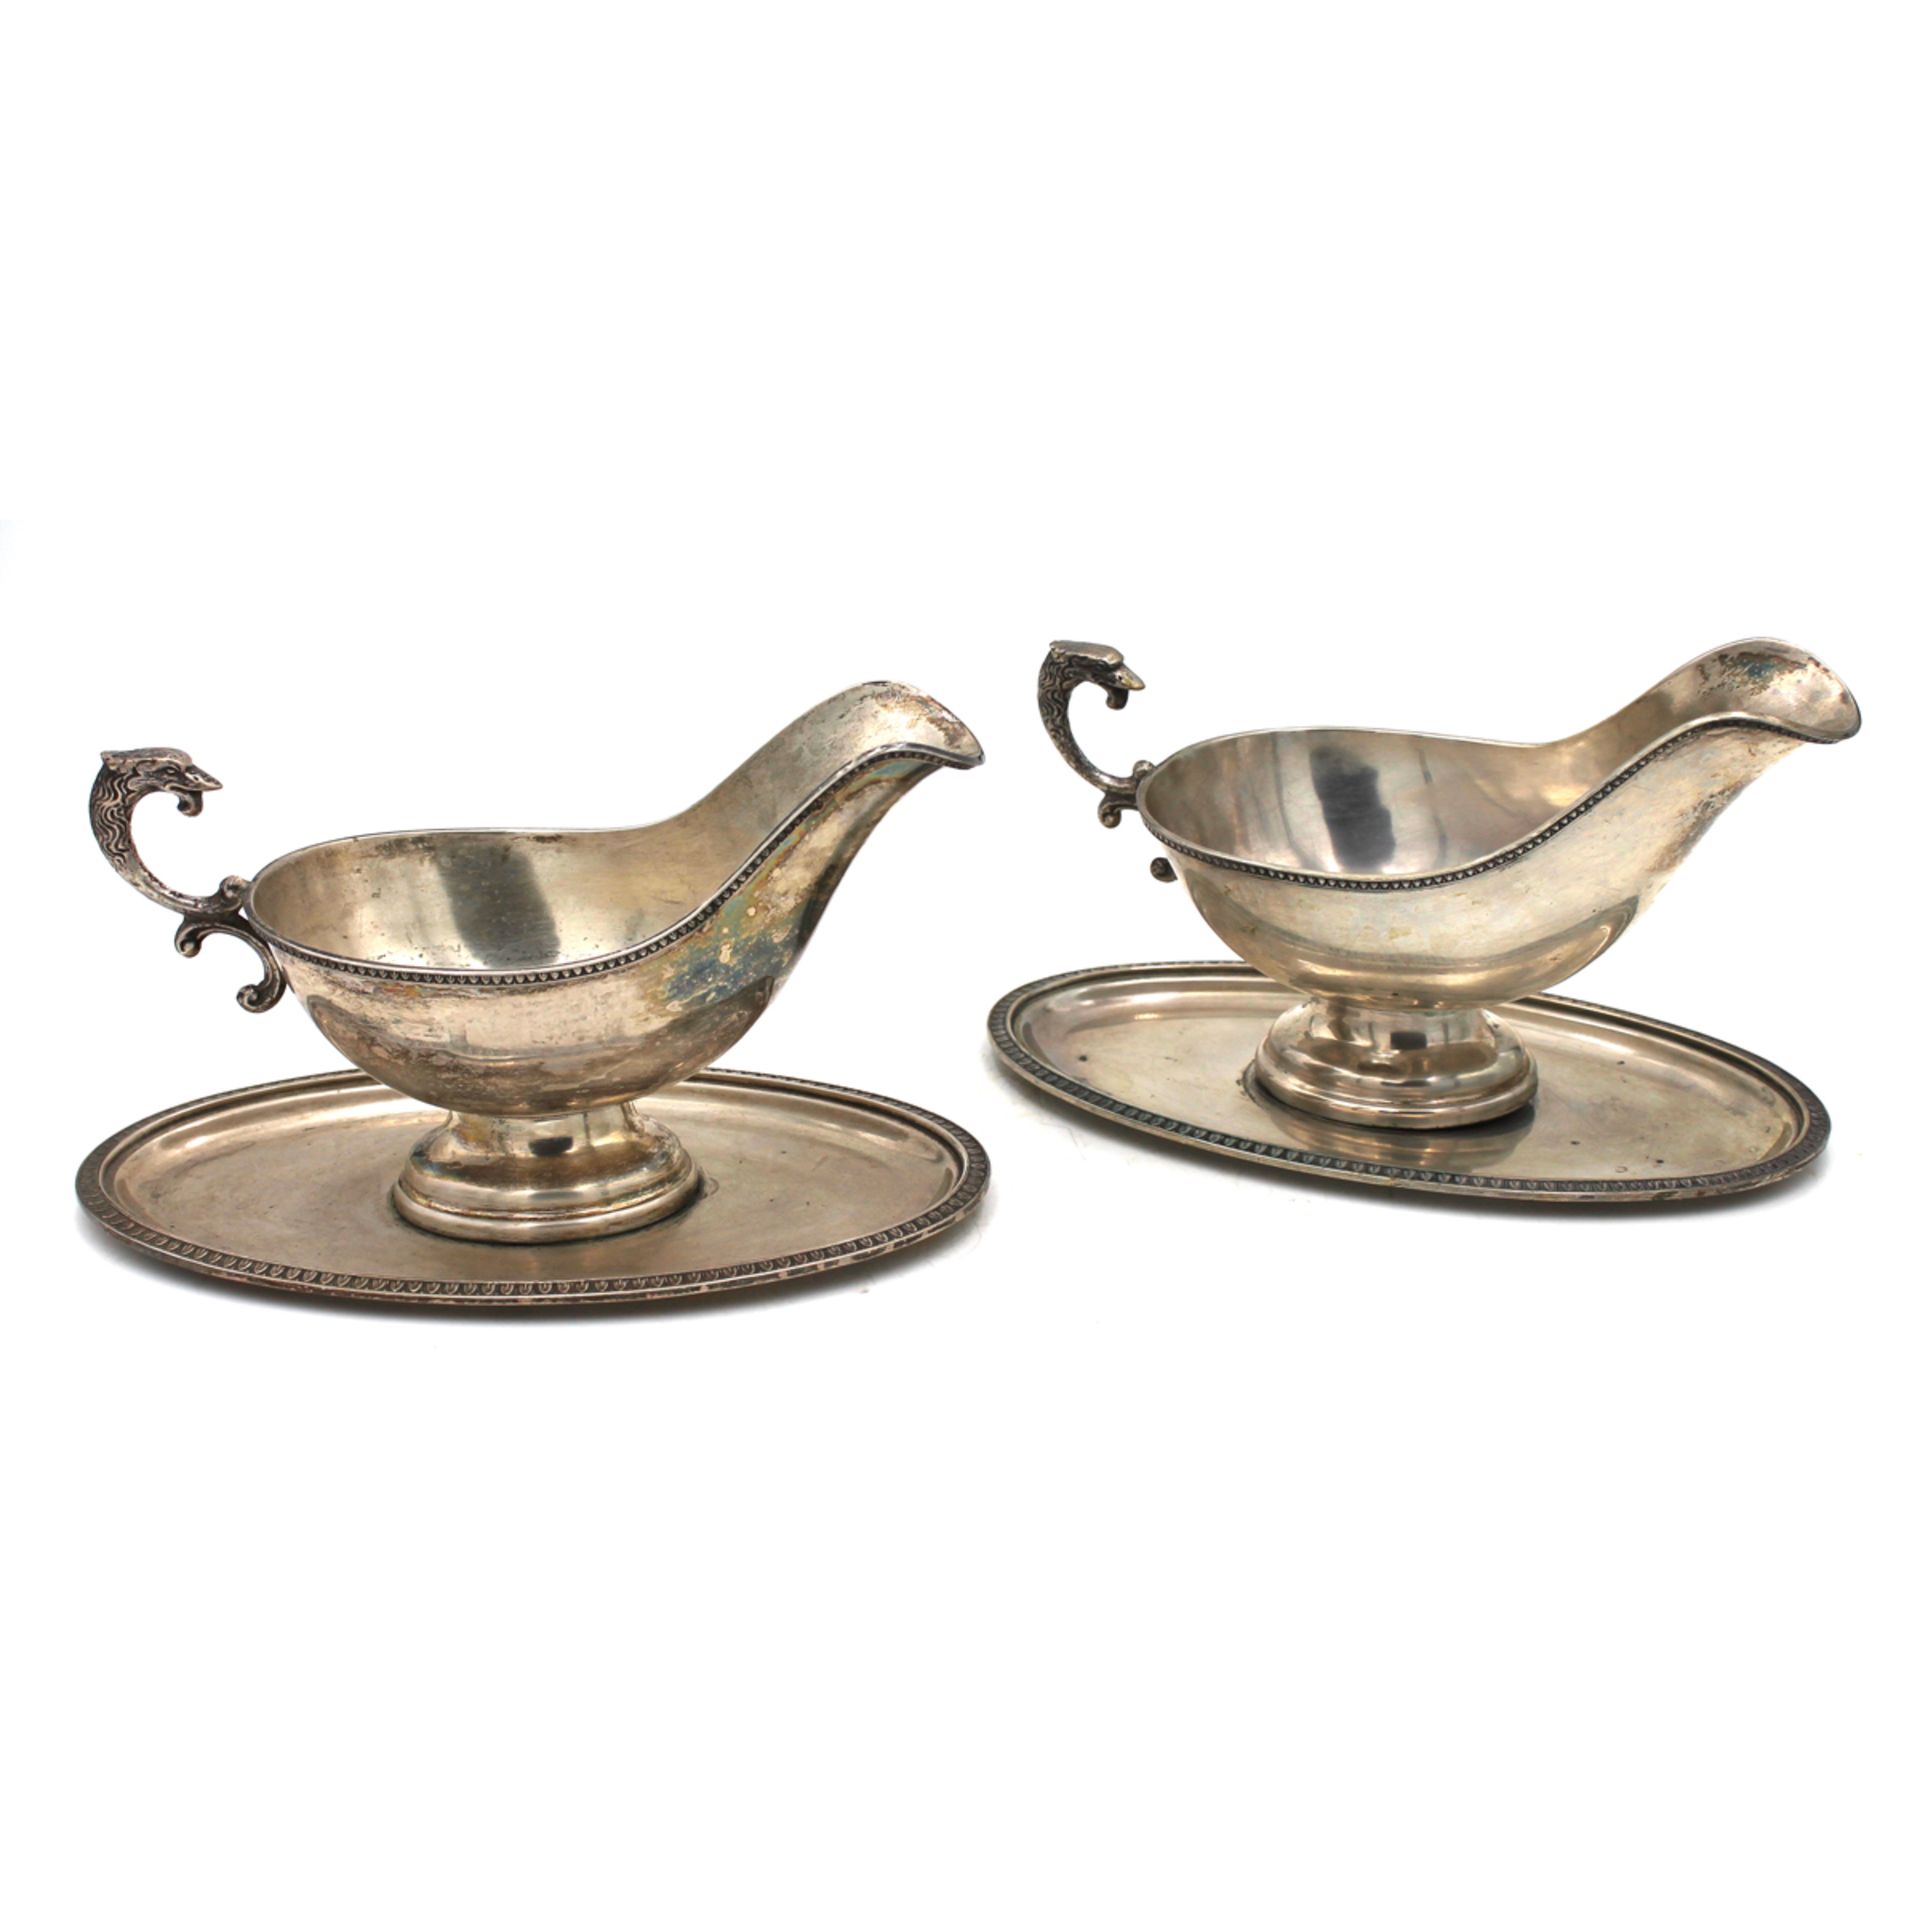 Coppia salsiere - Pair of gravy boats